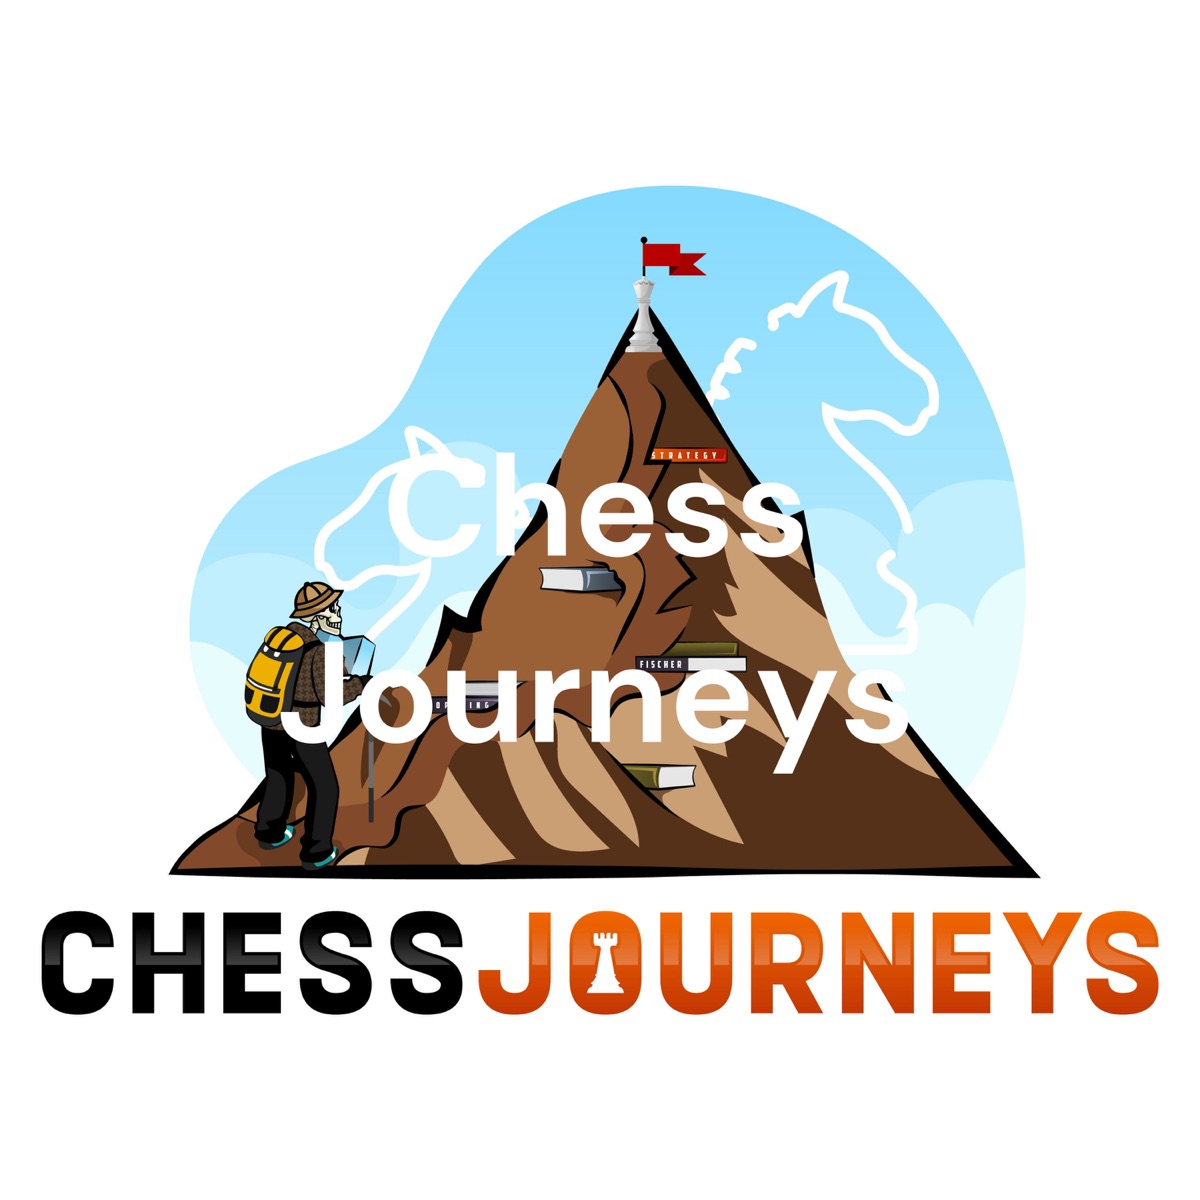 How To Learn Chess As An Adult (or, how I went from 300 to 1500